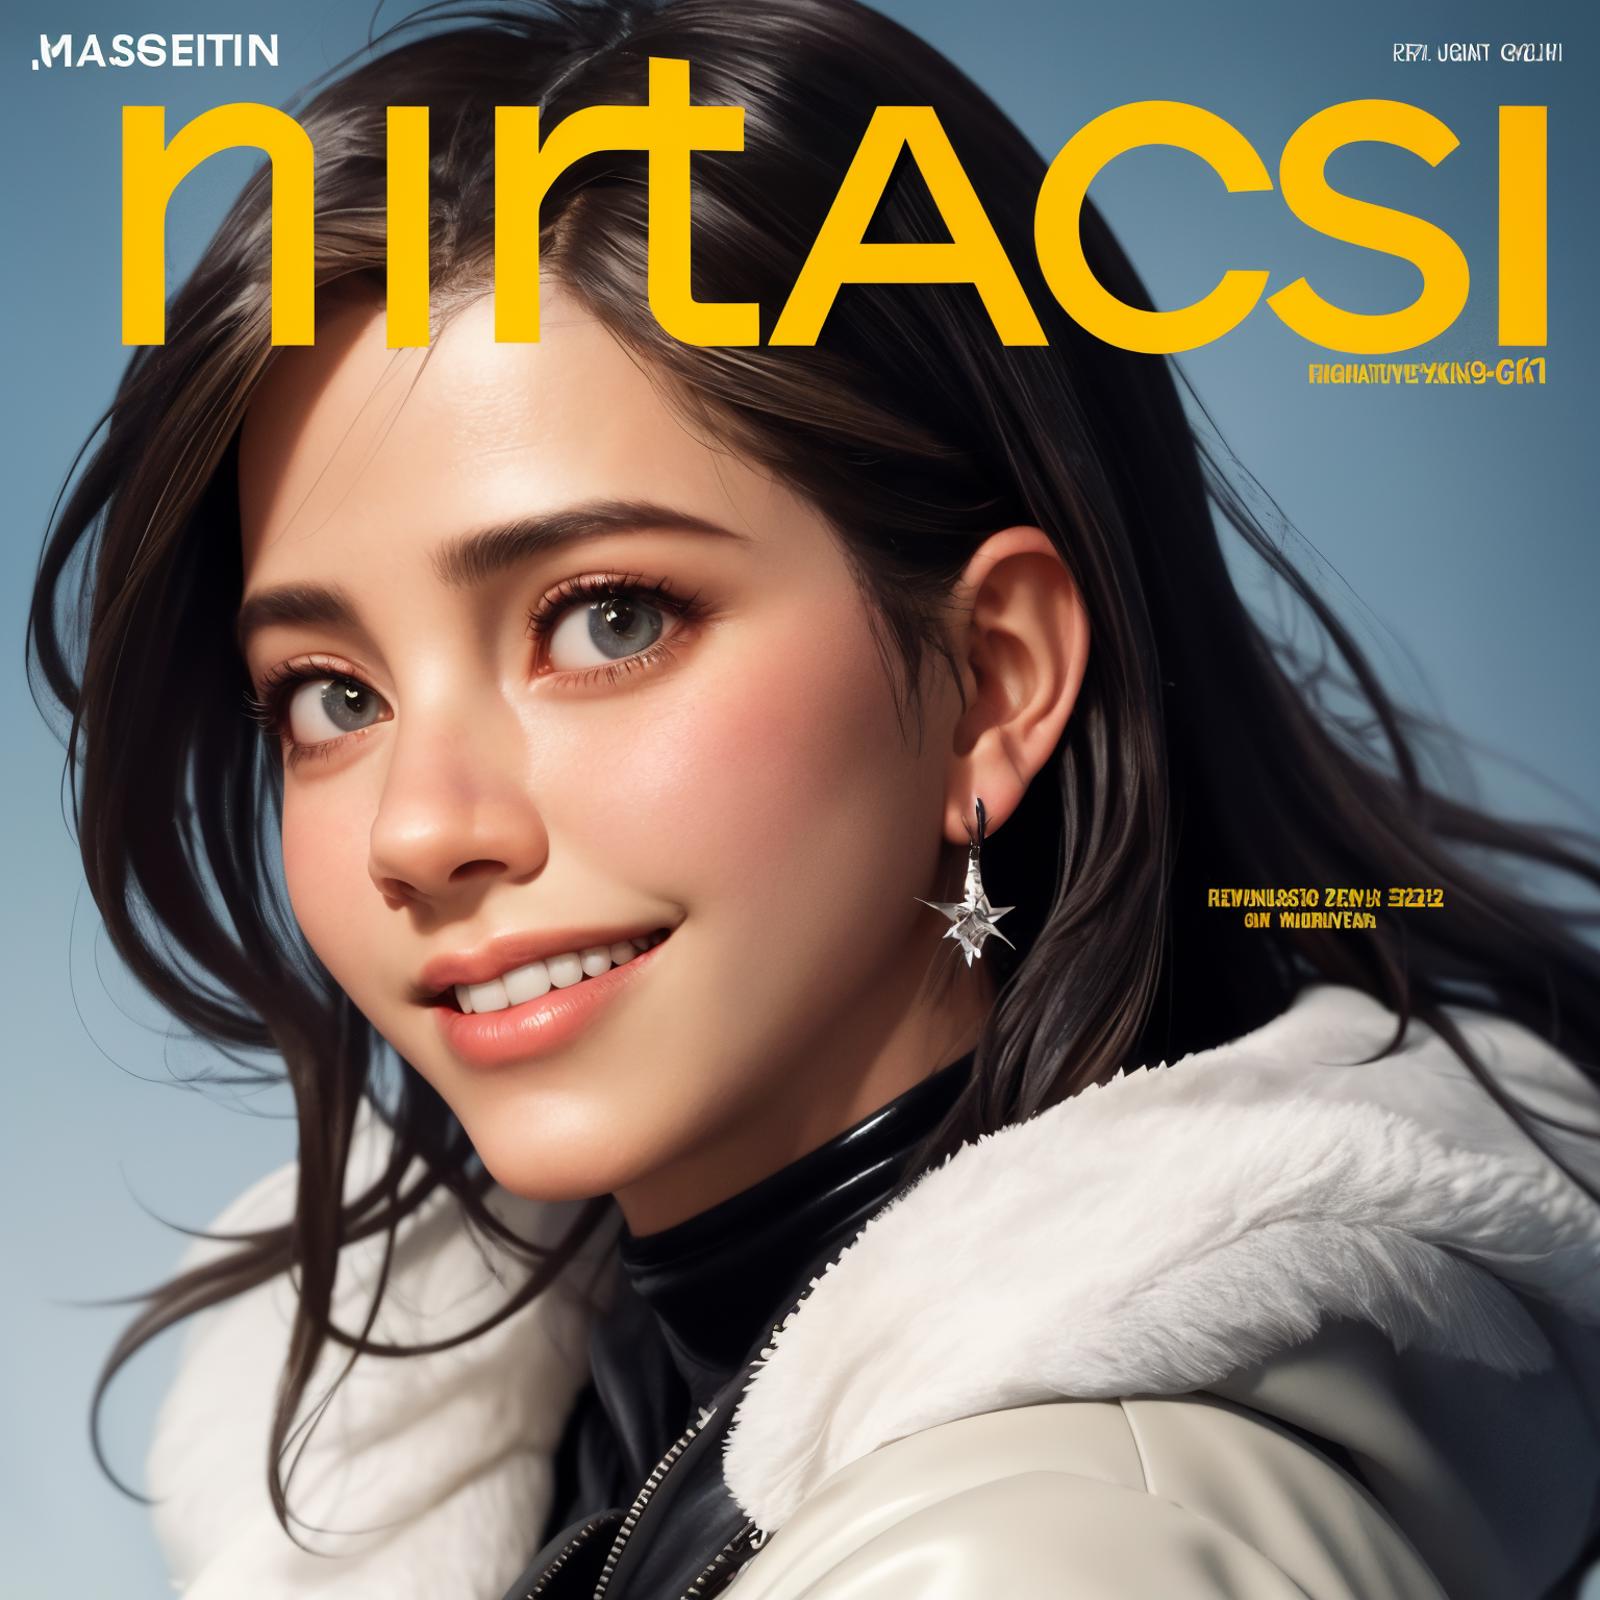 A smiling woman wearing a white jacket and earrings appears on the cover of Nirvana magazine.